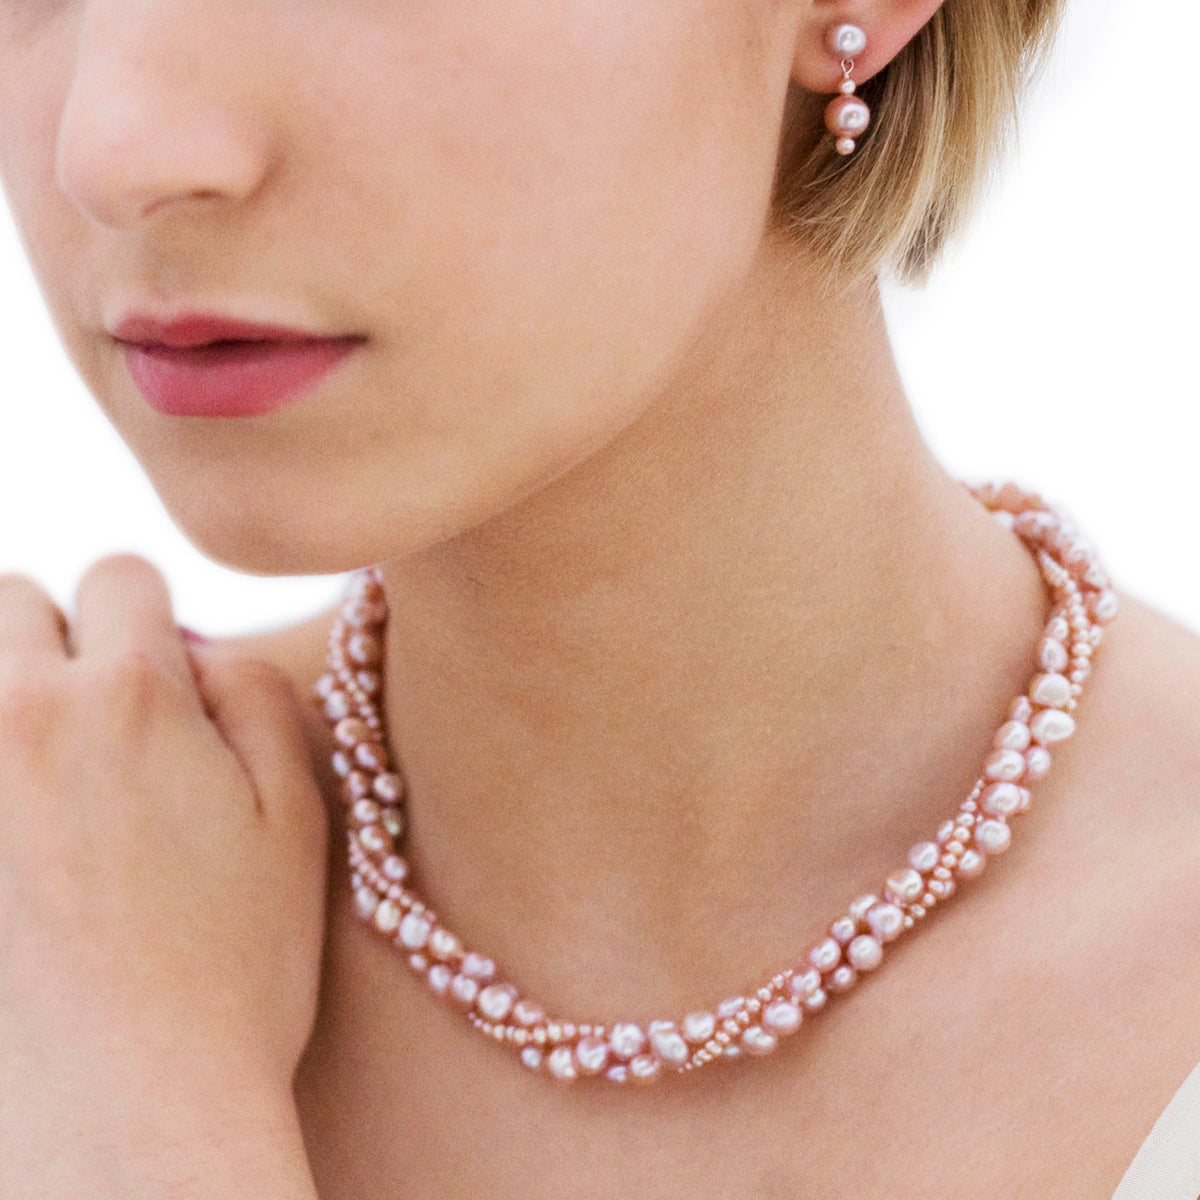 Pink Freshwater Pearl (Mixed Size) 3 Strand Necklace